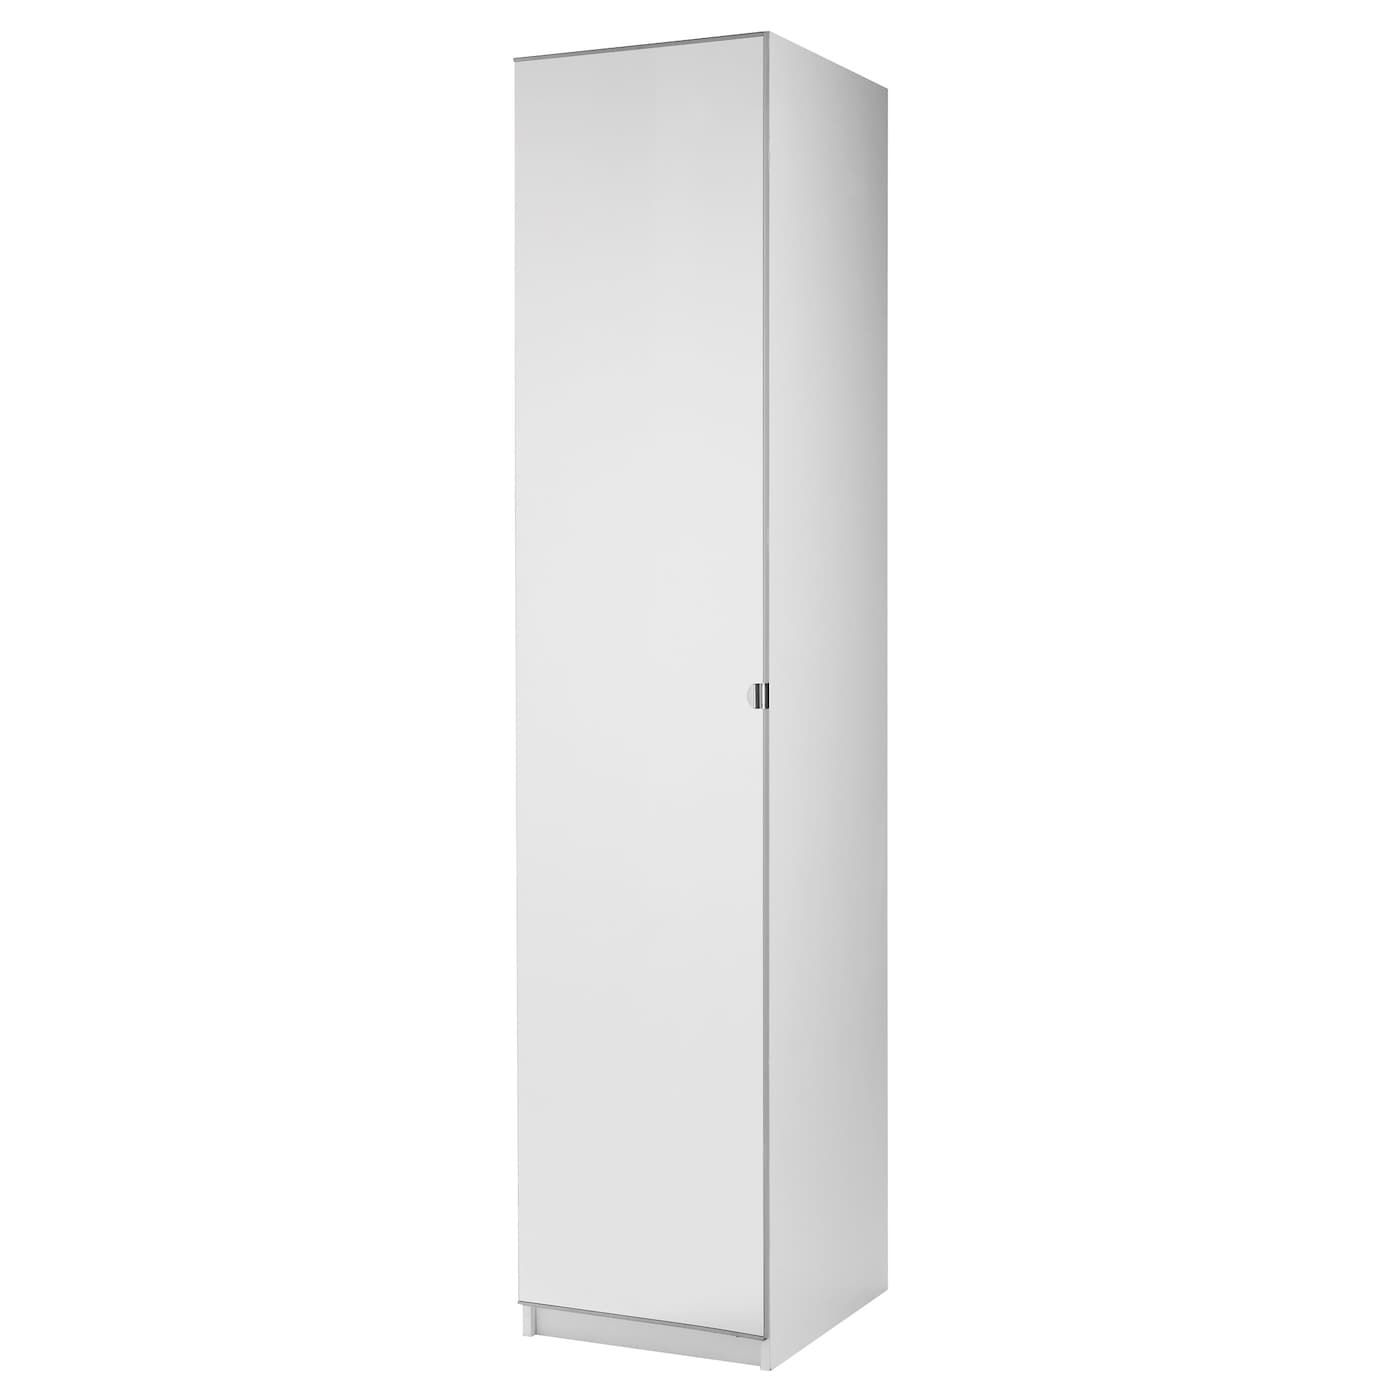 Pax / Vikedal Wardrobe With 1 Door, White/mirror Glass, 50x60x236 Cm – Ikea Pertaining To 1 Door Mirrored Wardrobes (View 6 of 15)